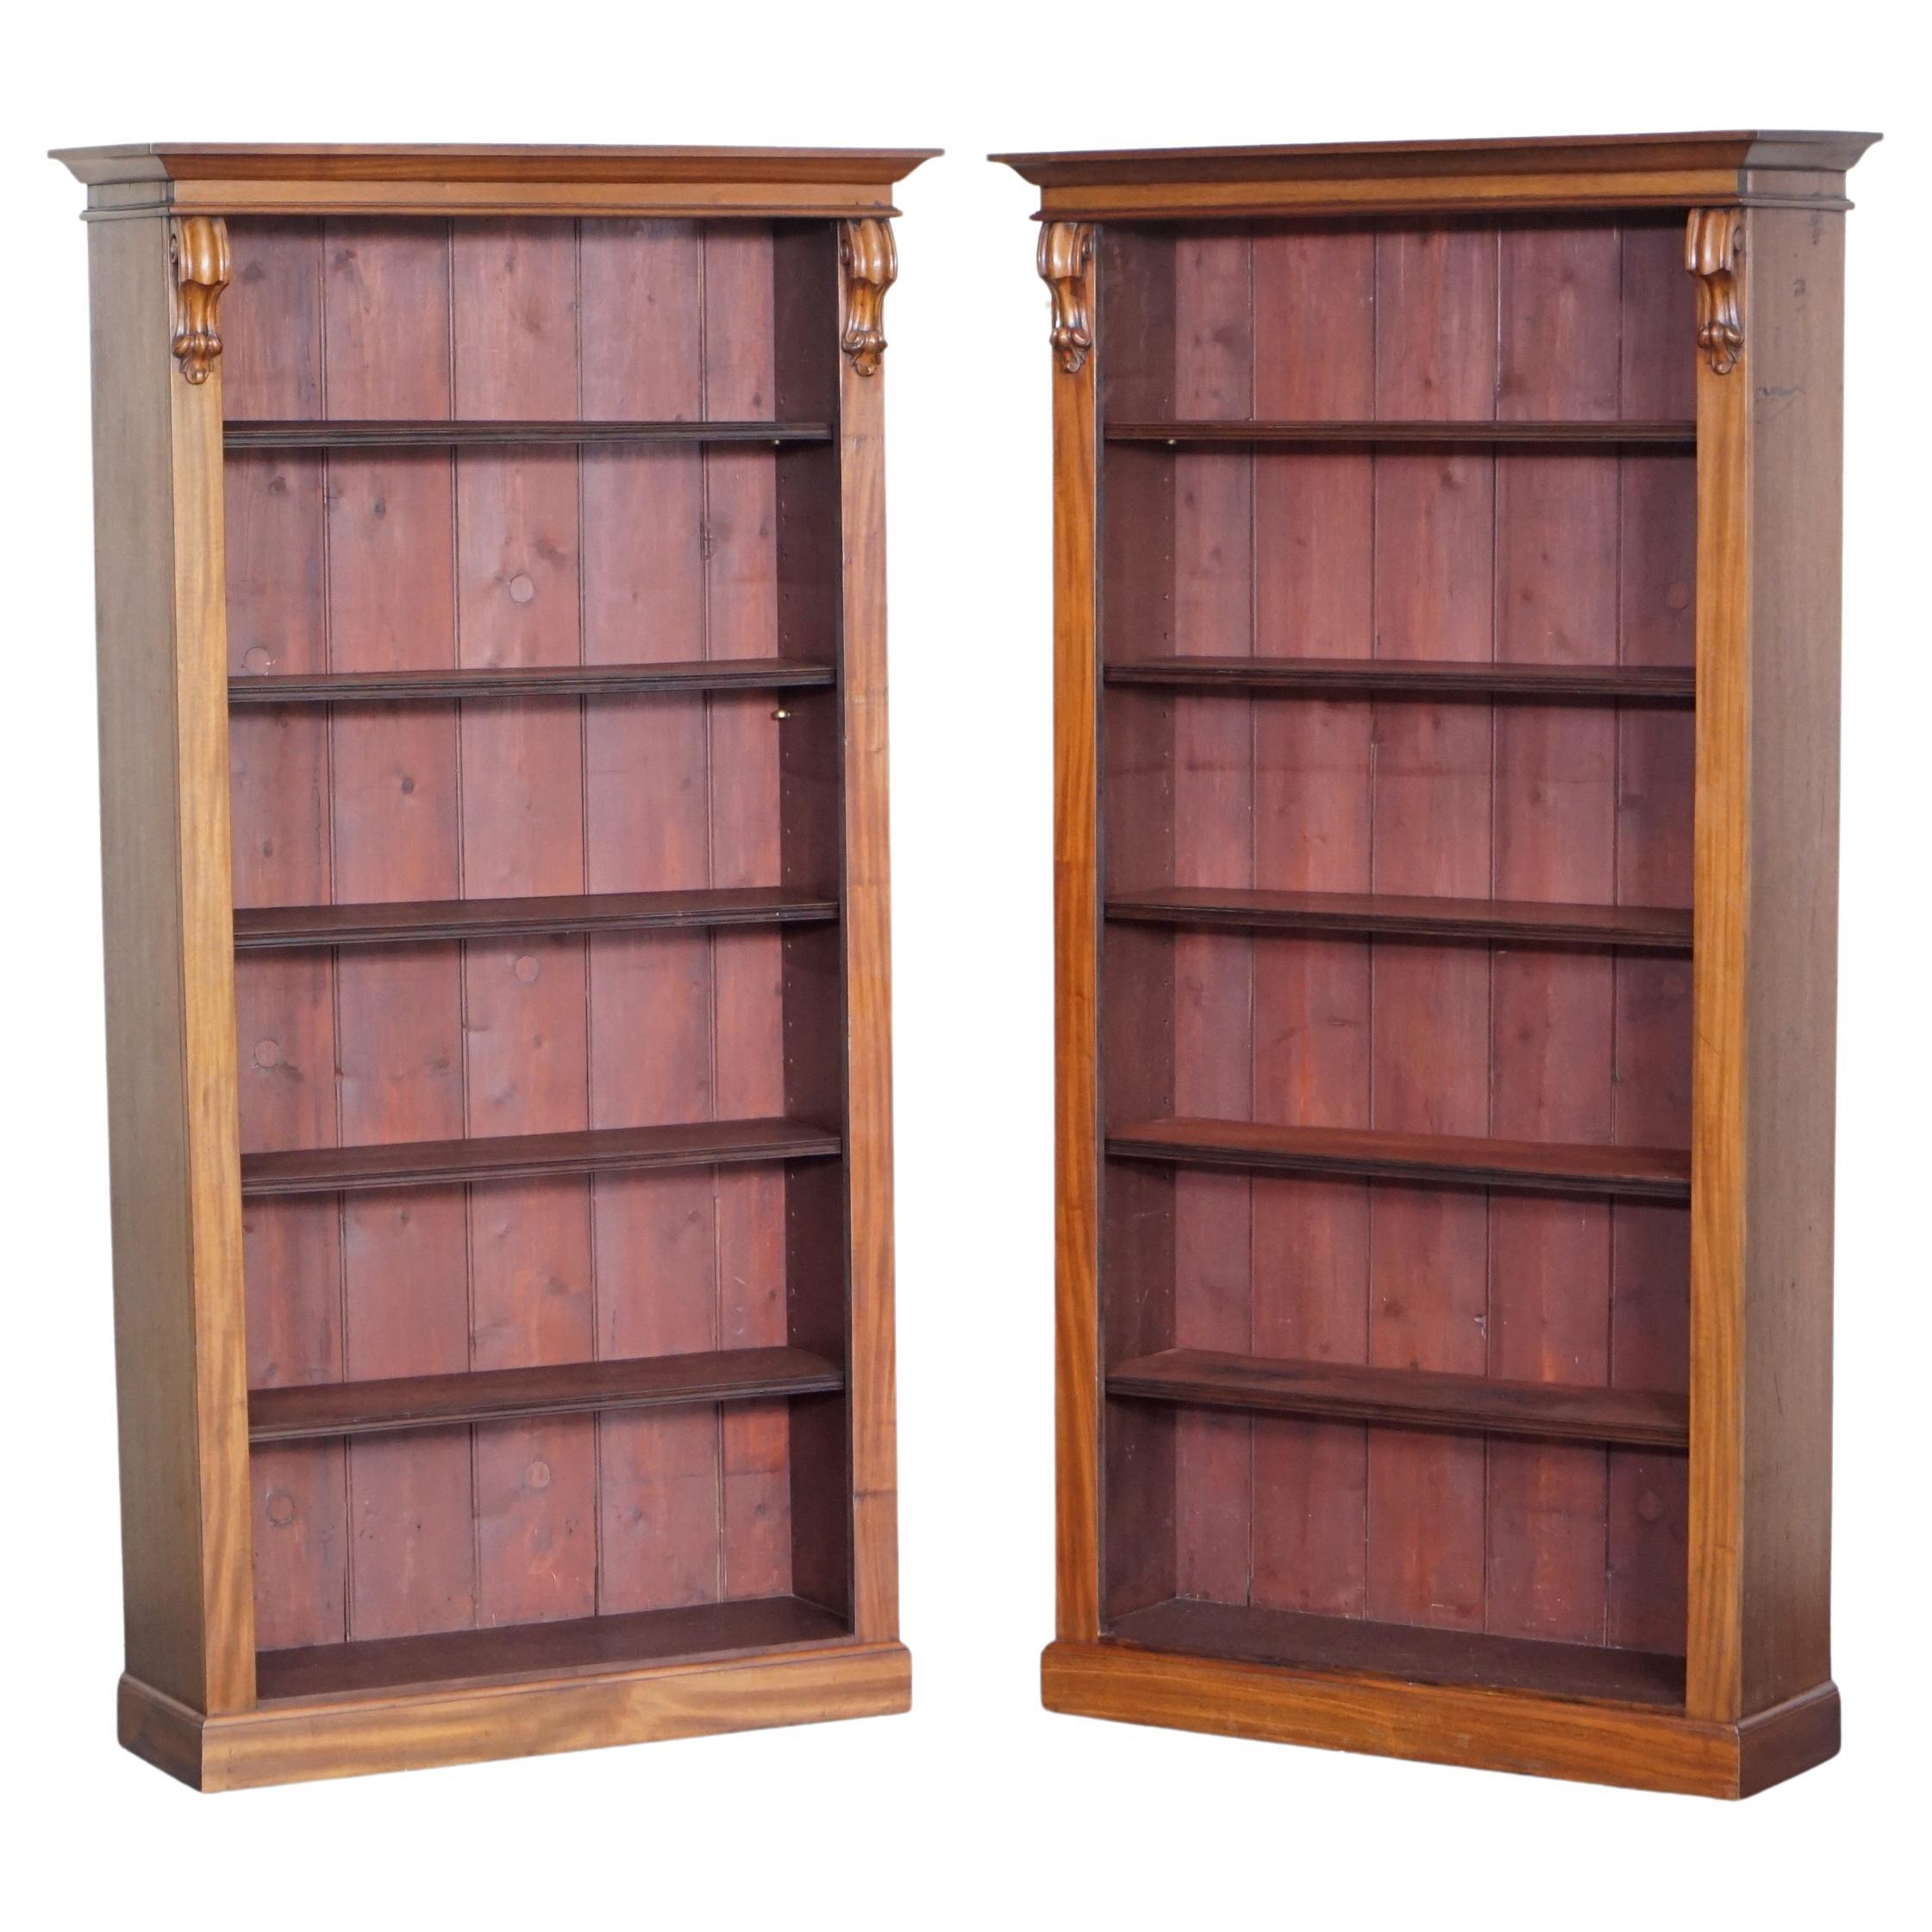 Pair of Victorian Mahogany Tall Open Library Bookcases Height Adjustable Shelves